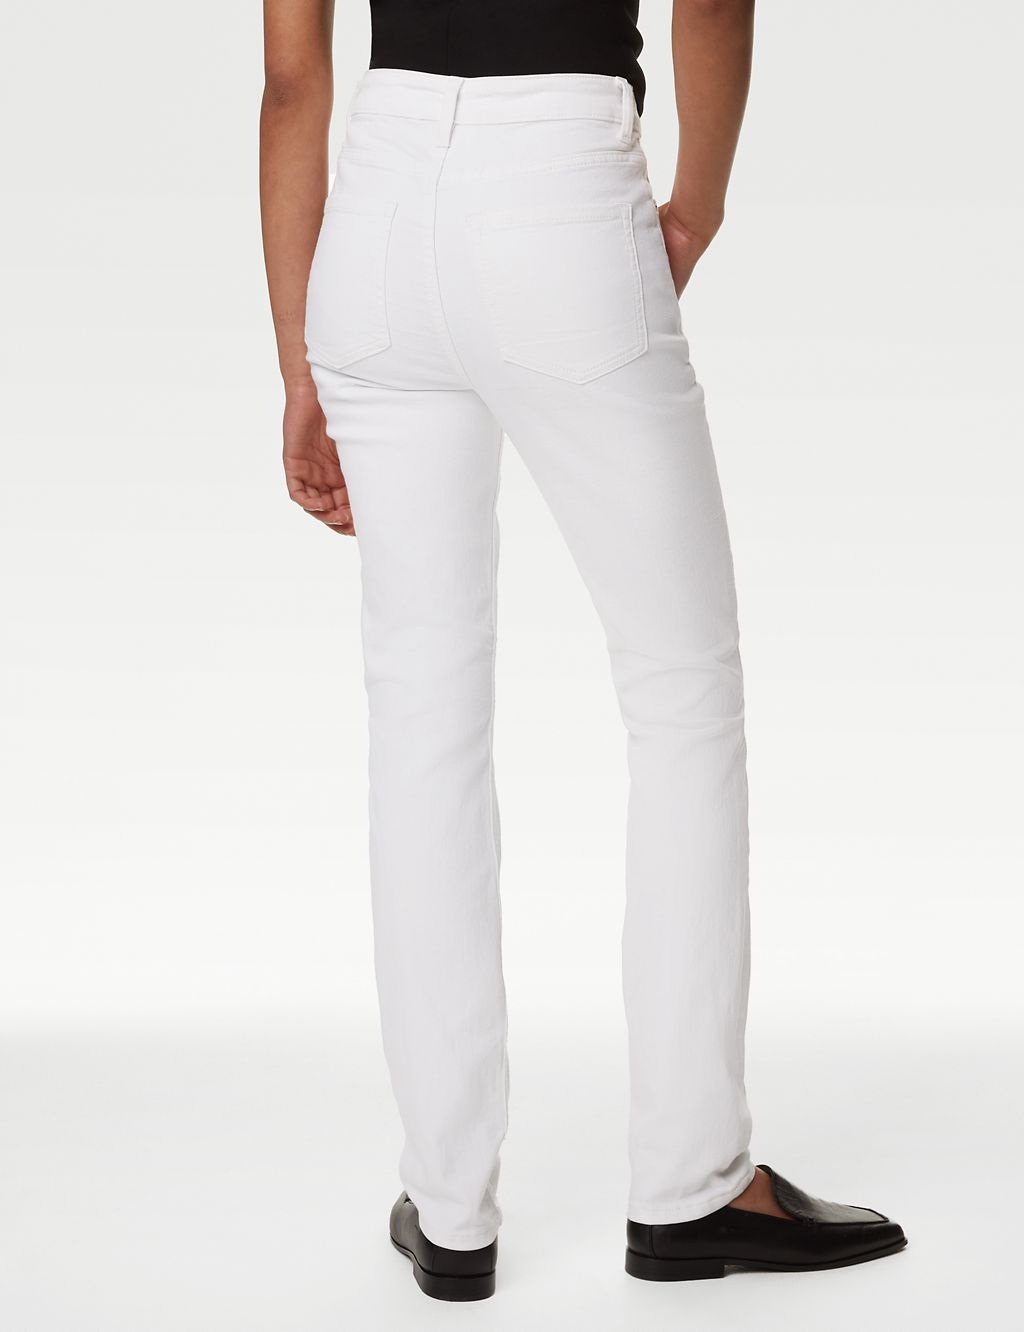 Lily Slim Fit Jeans with Stretch 5 of 5